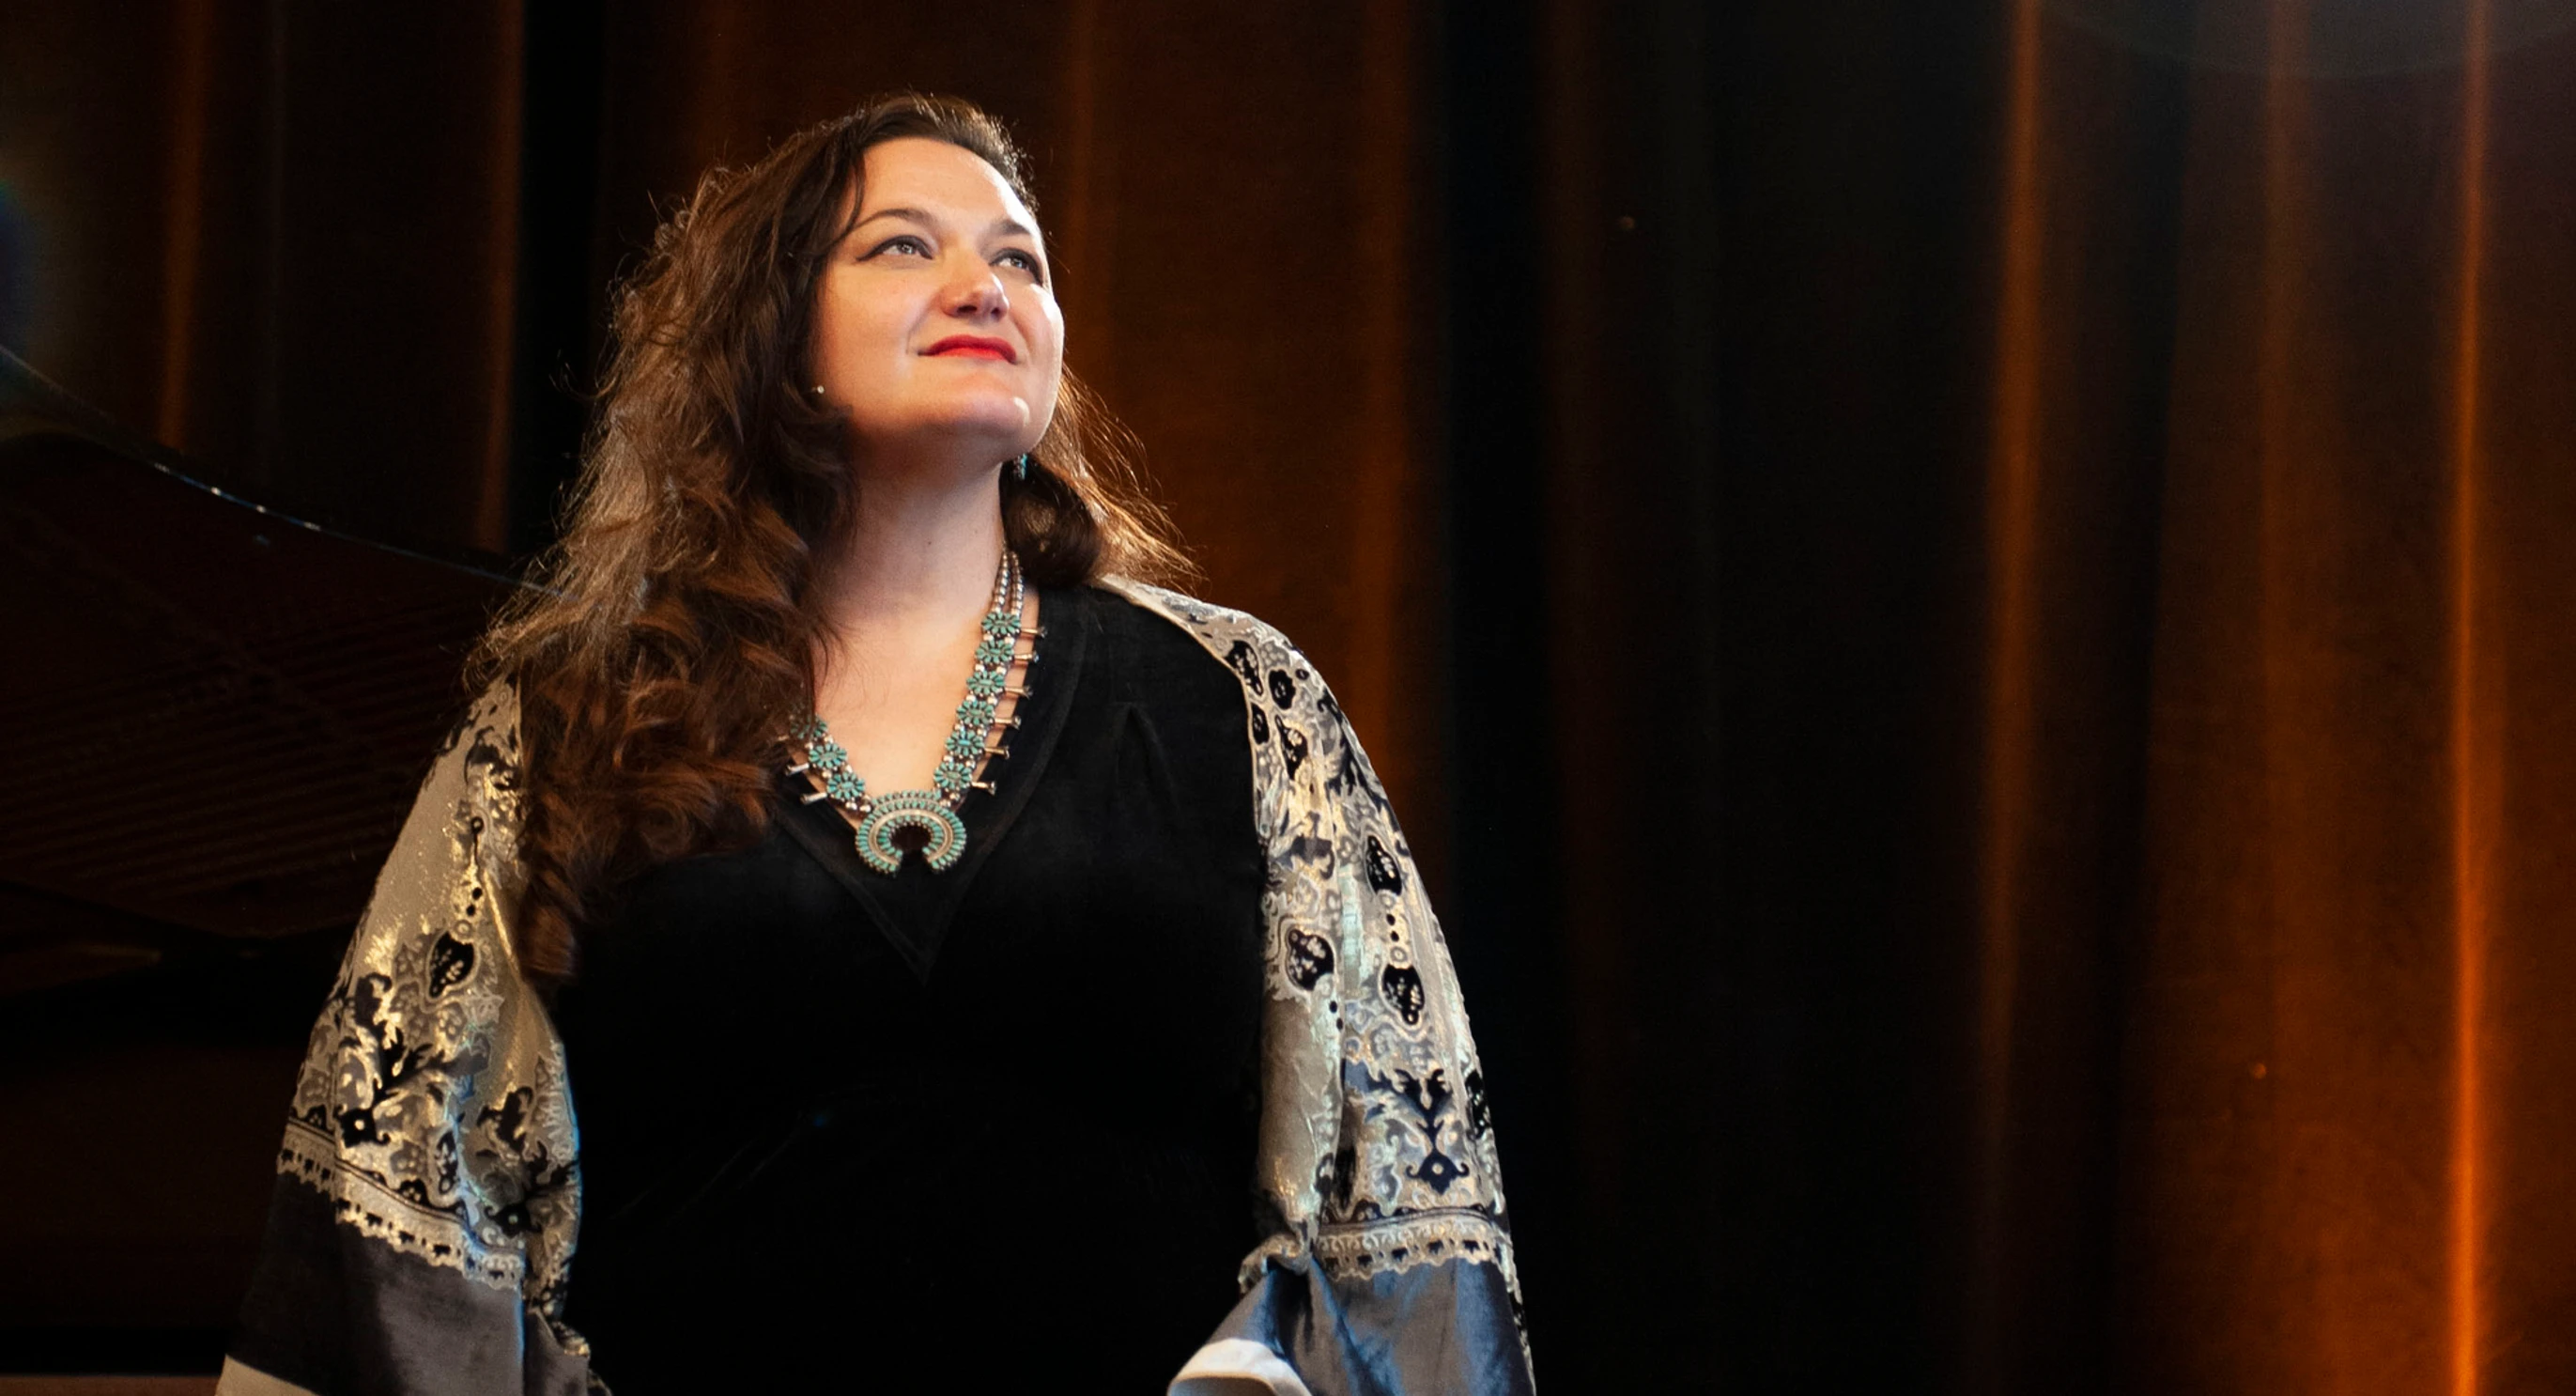 Native American Soprano Will Honor Her Ancestor, Chicago’s Indigenous People at Upcoming Opera